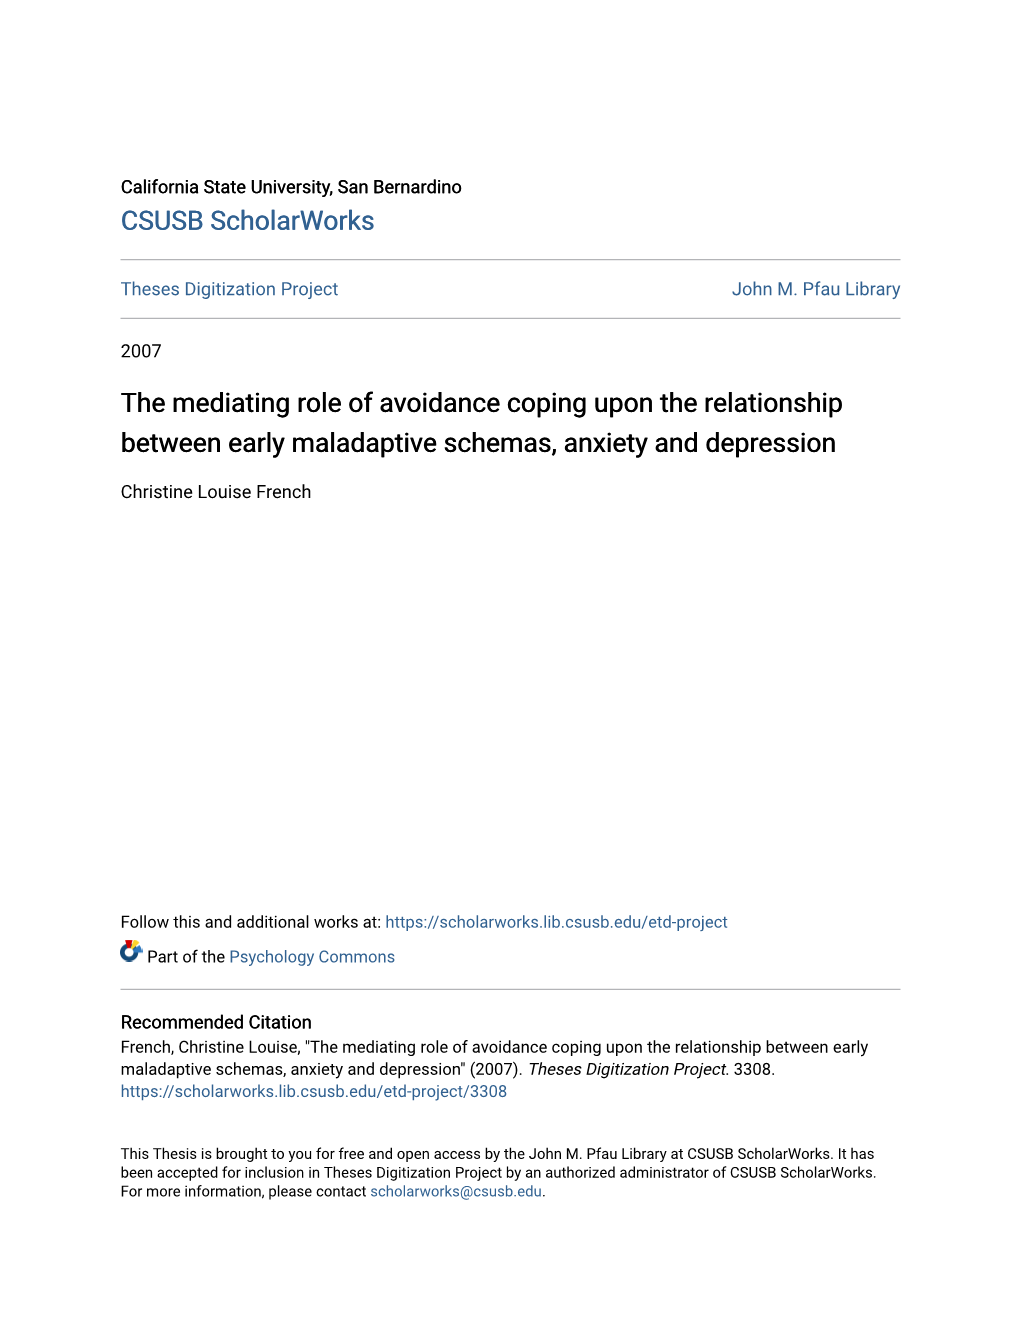 The Mediating Role of Avoidance Coping Upon the Relationship Between Early Maladaptive Schemas, Anxiety and Depression